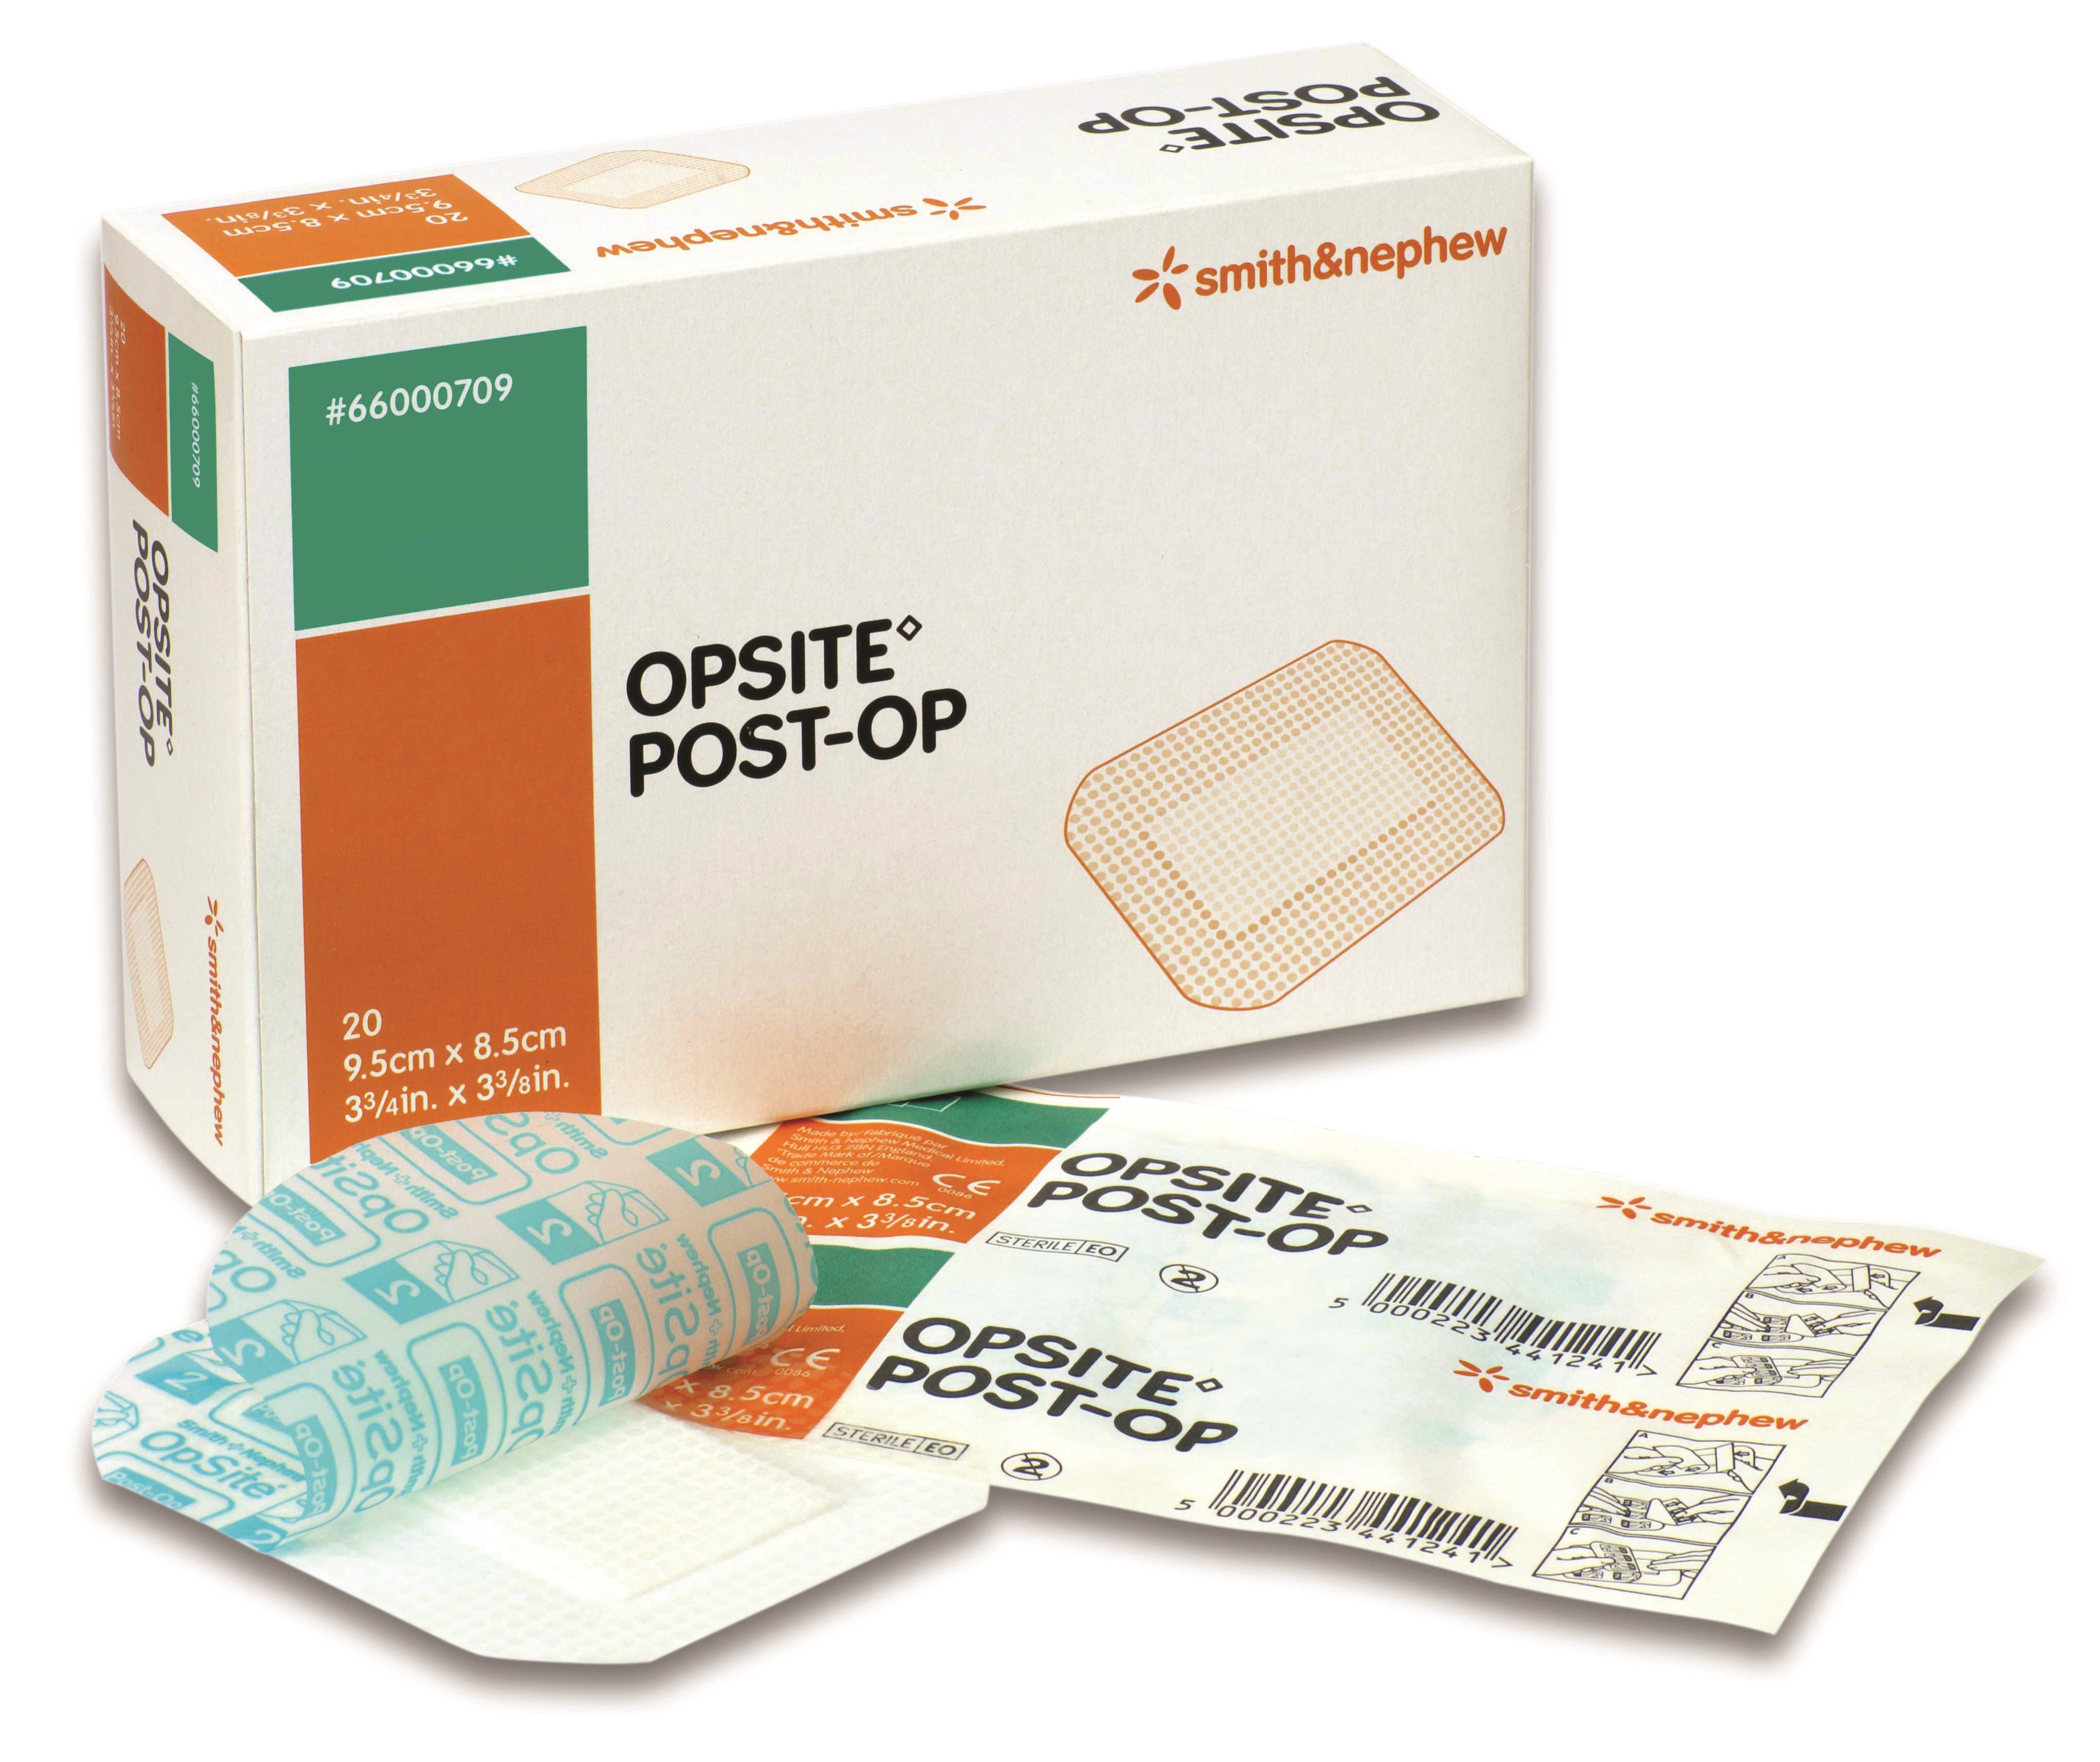 Opsite Post-Op Wound Dressing 35cm x 10cm